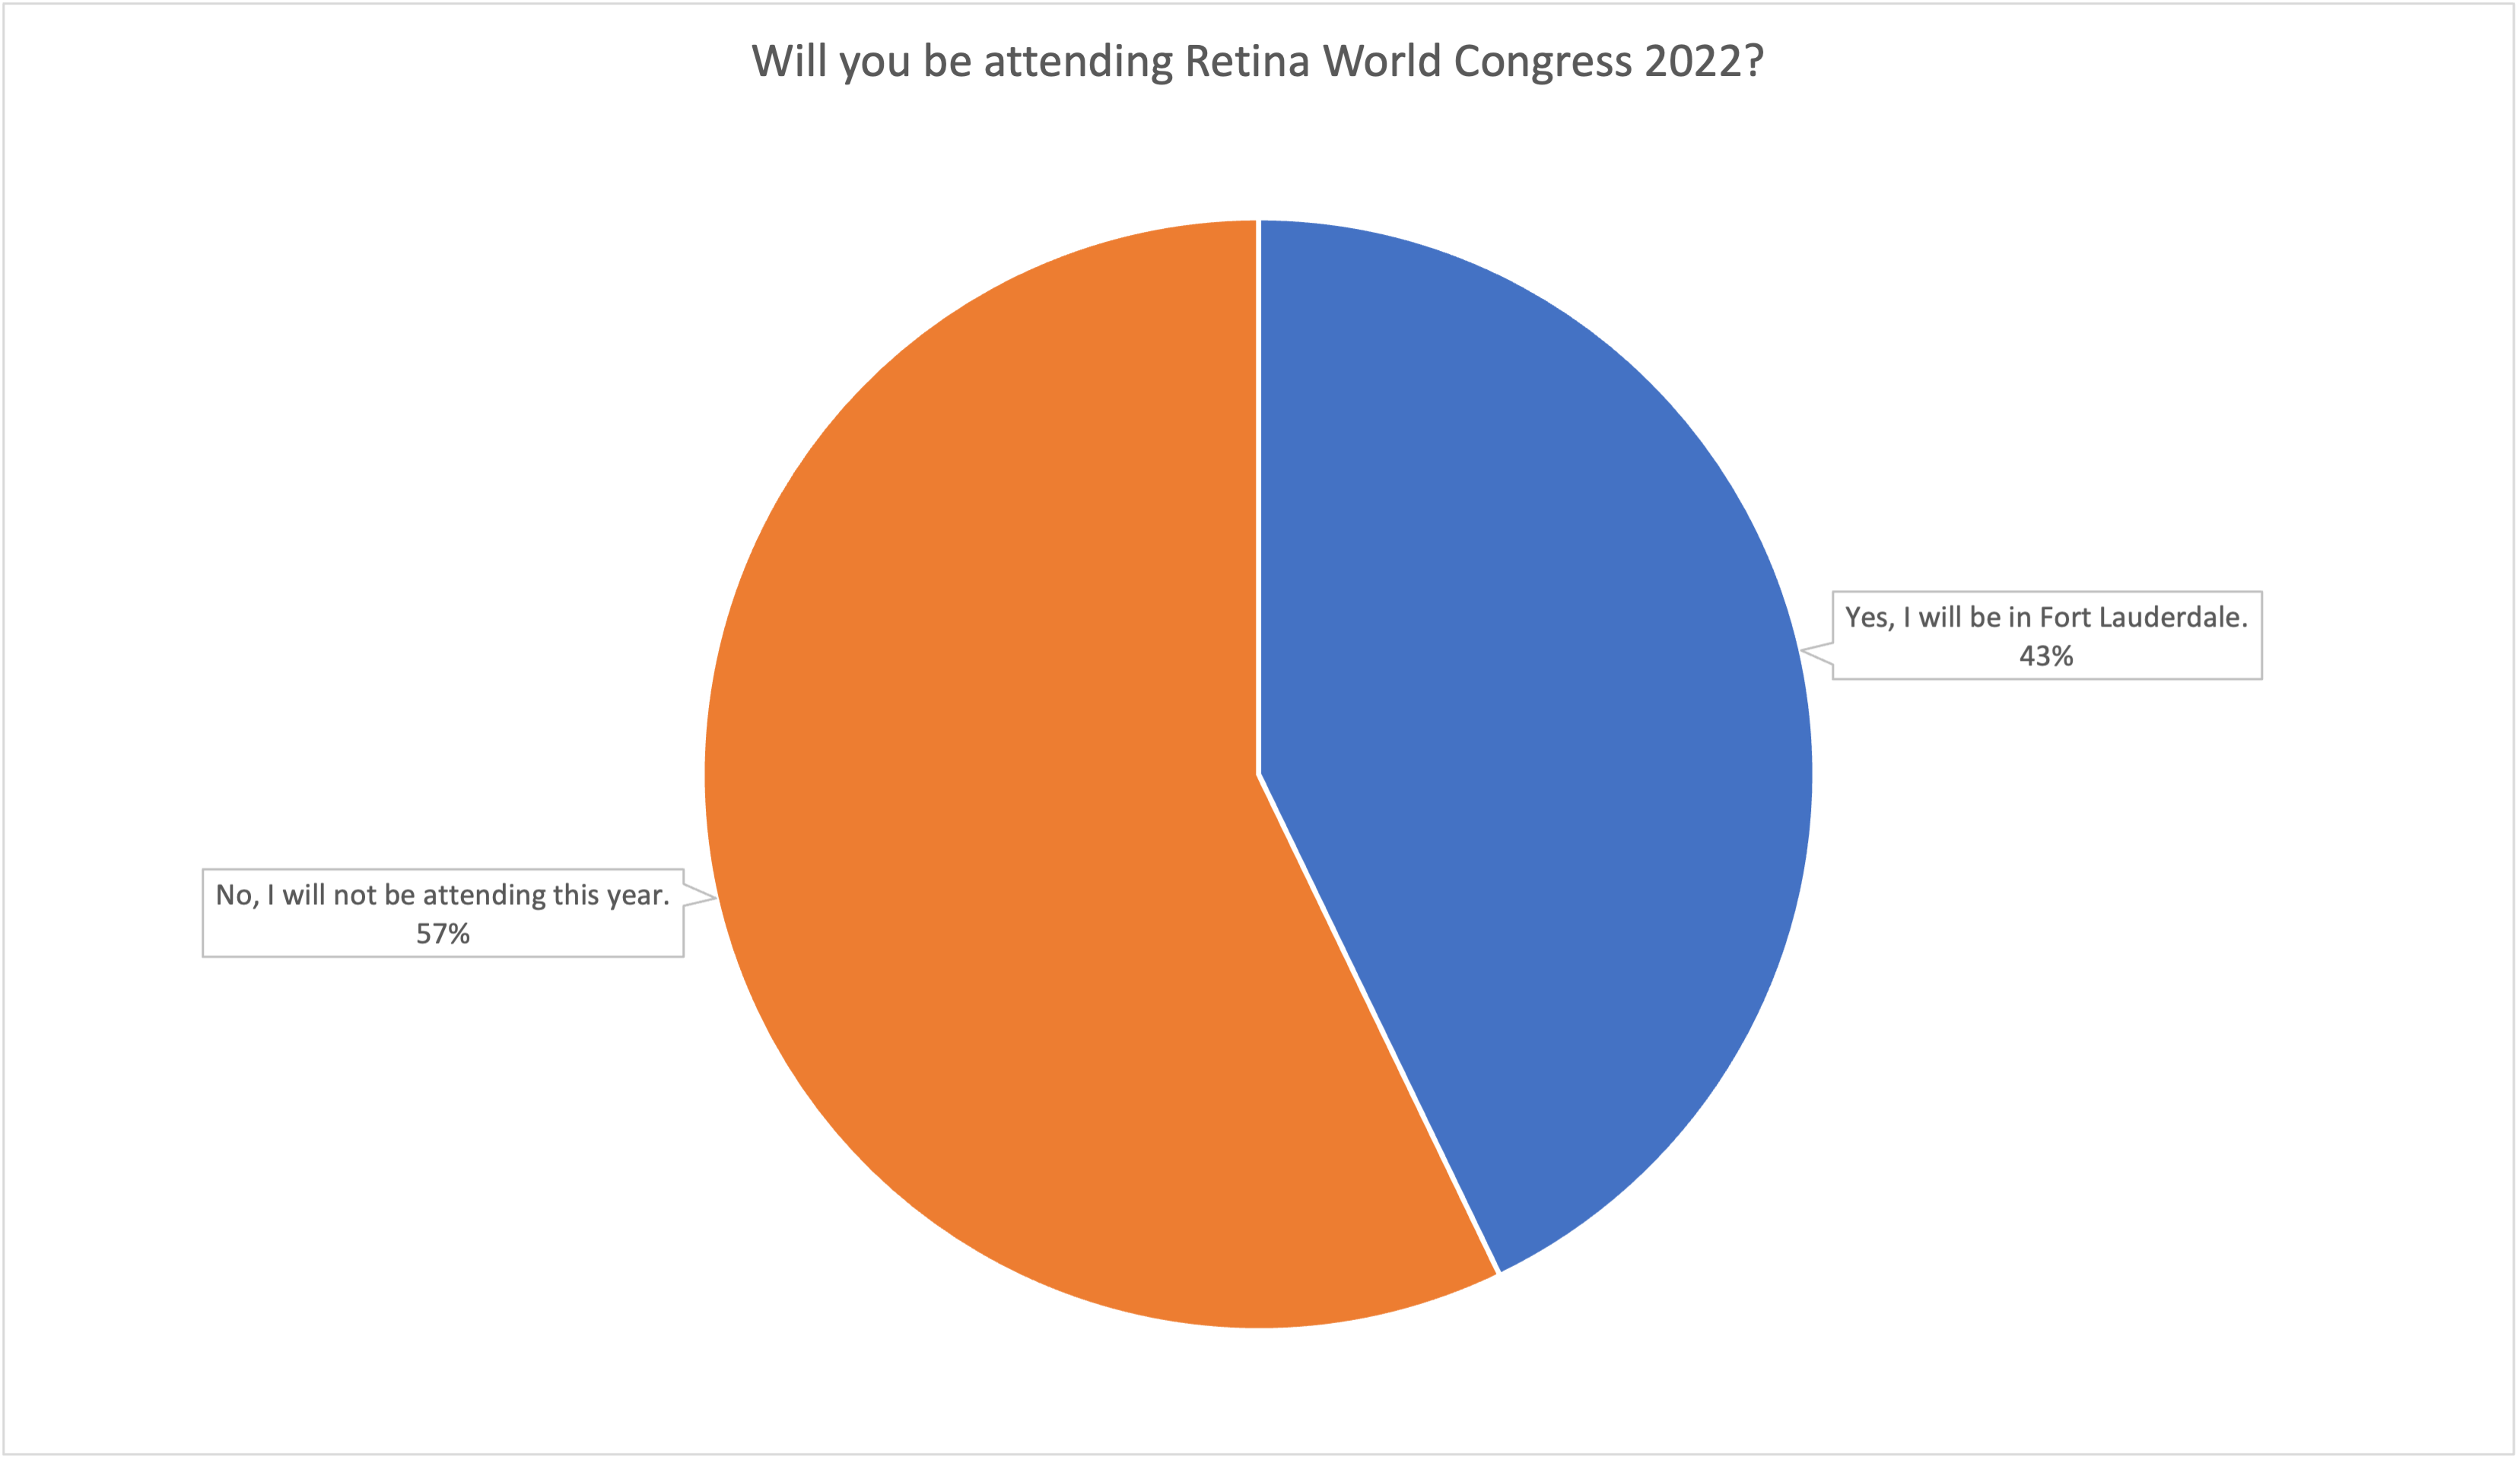 Poll results: Are you attending Retina World Congress 2022?